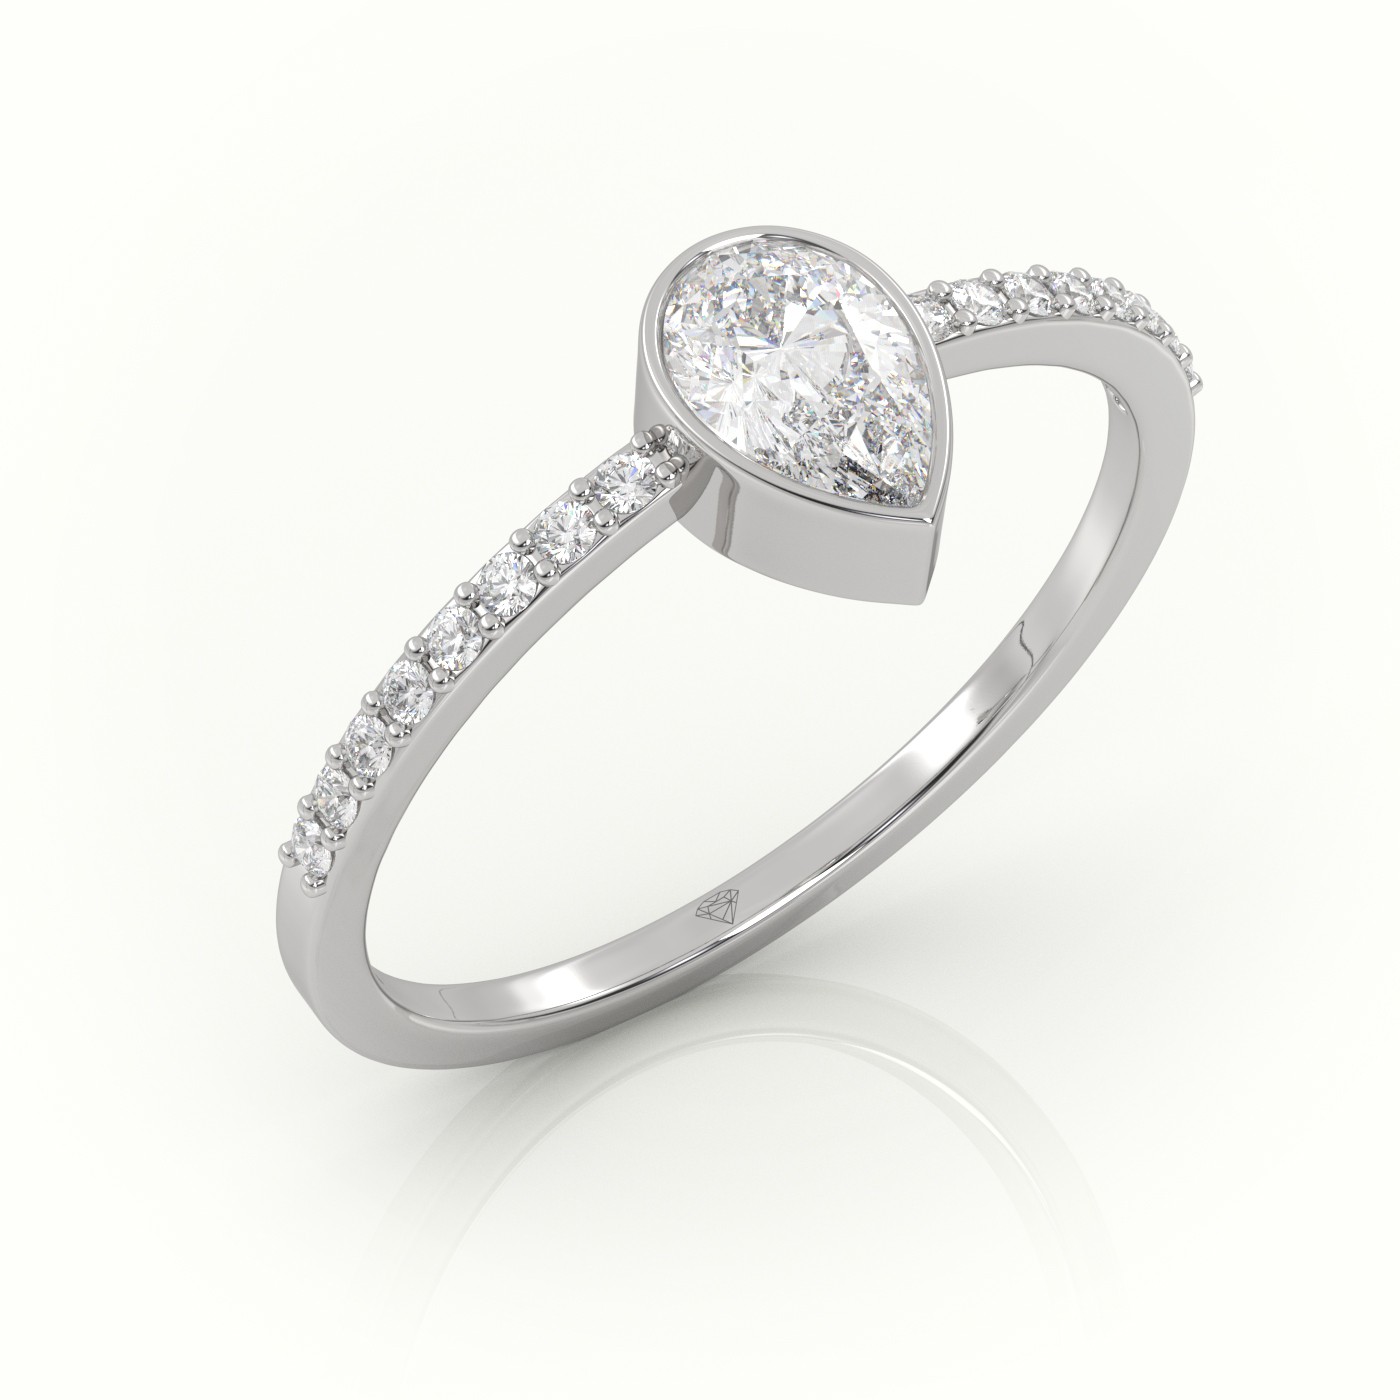 18K WHITE GOLD PEAR CUT DIAMOND CHANNEL SETTING ENGAGEMENT RING